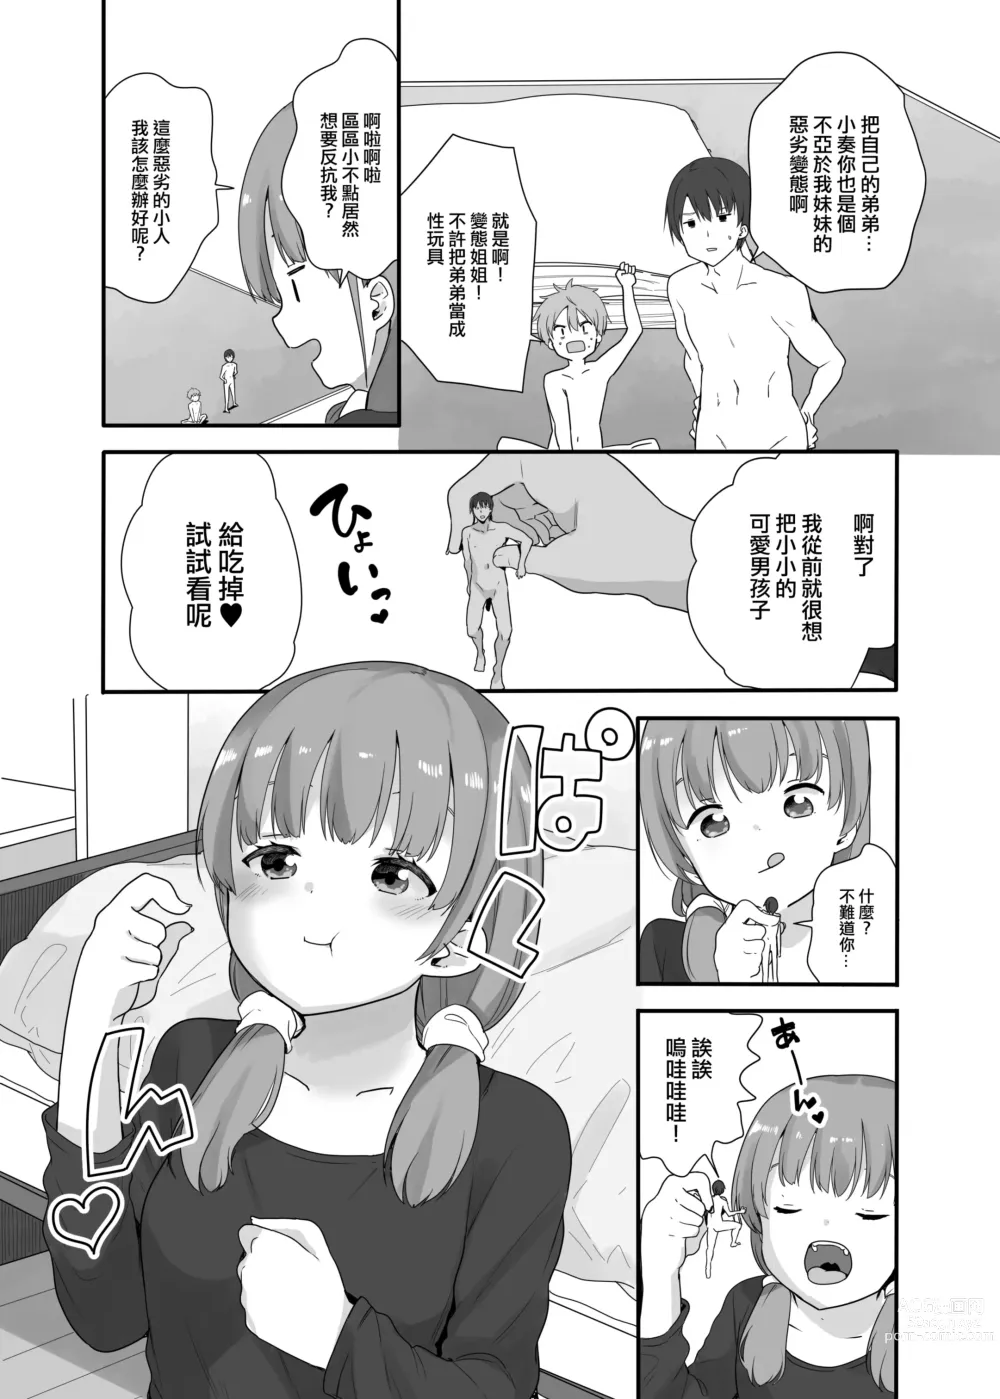 Page 7 of doujinshi Little Sister With Grande Everyday 3